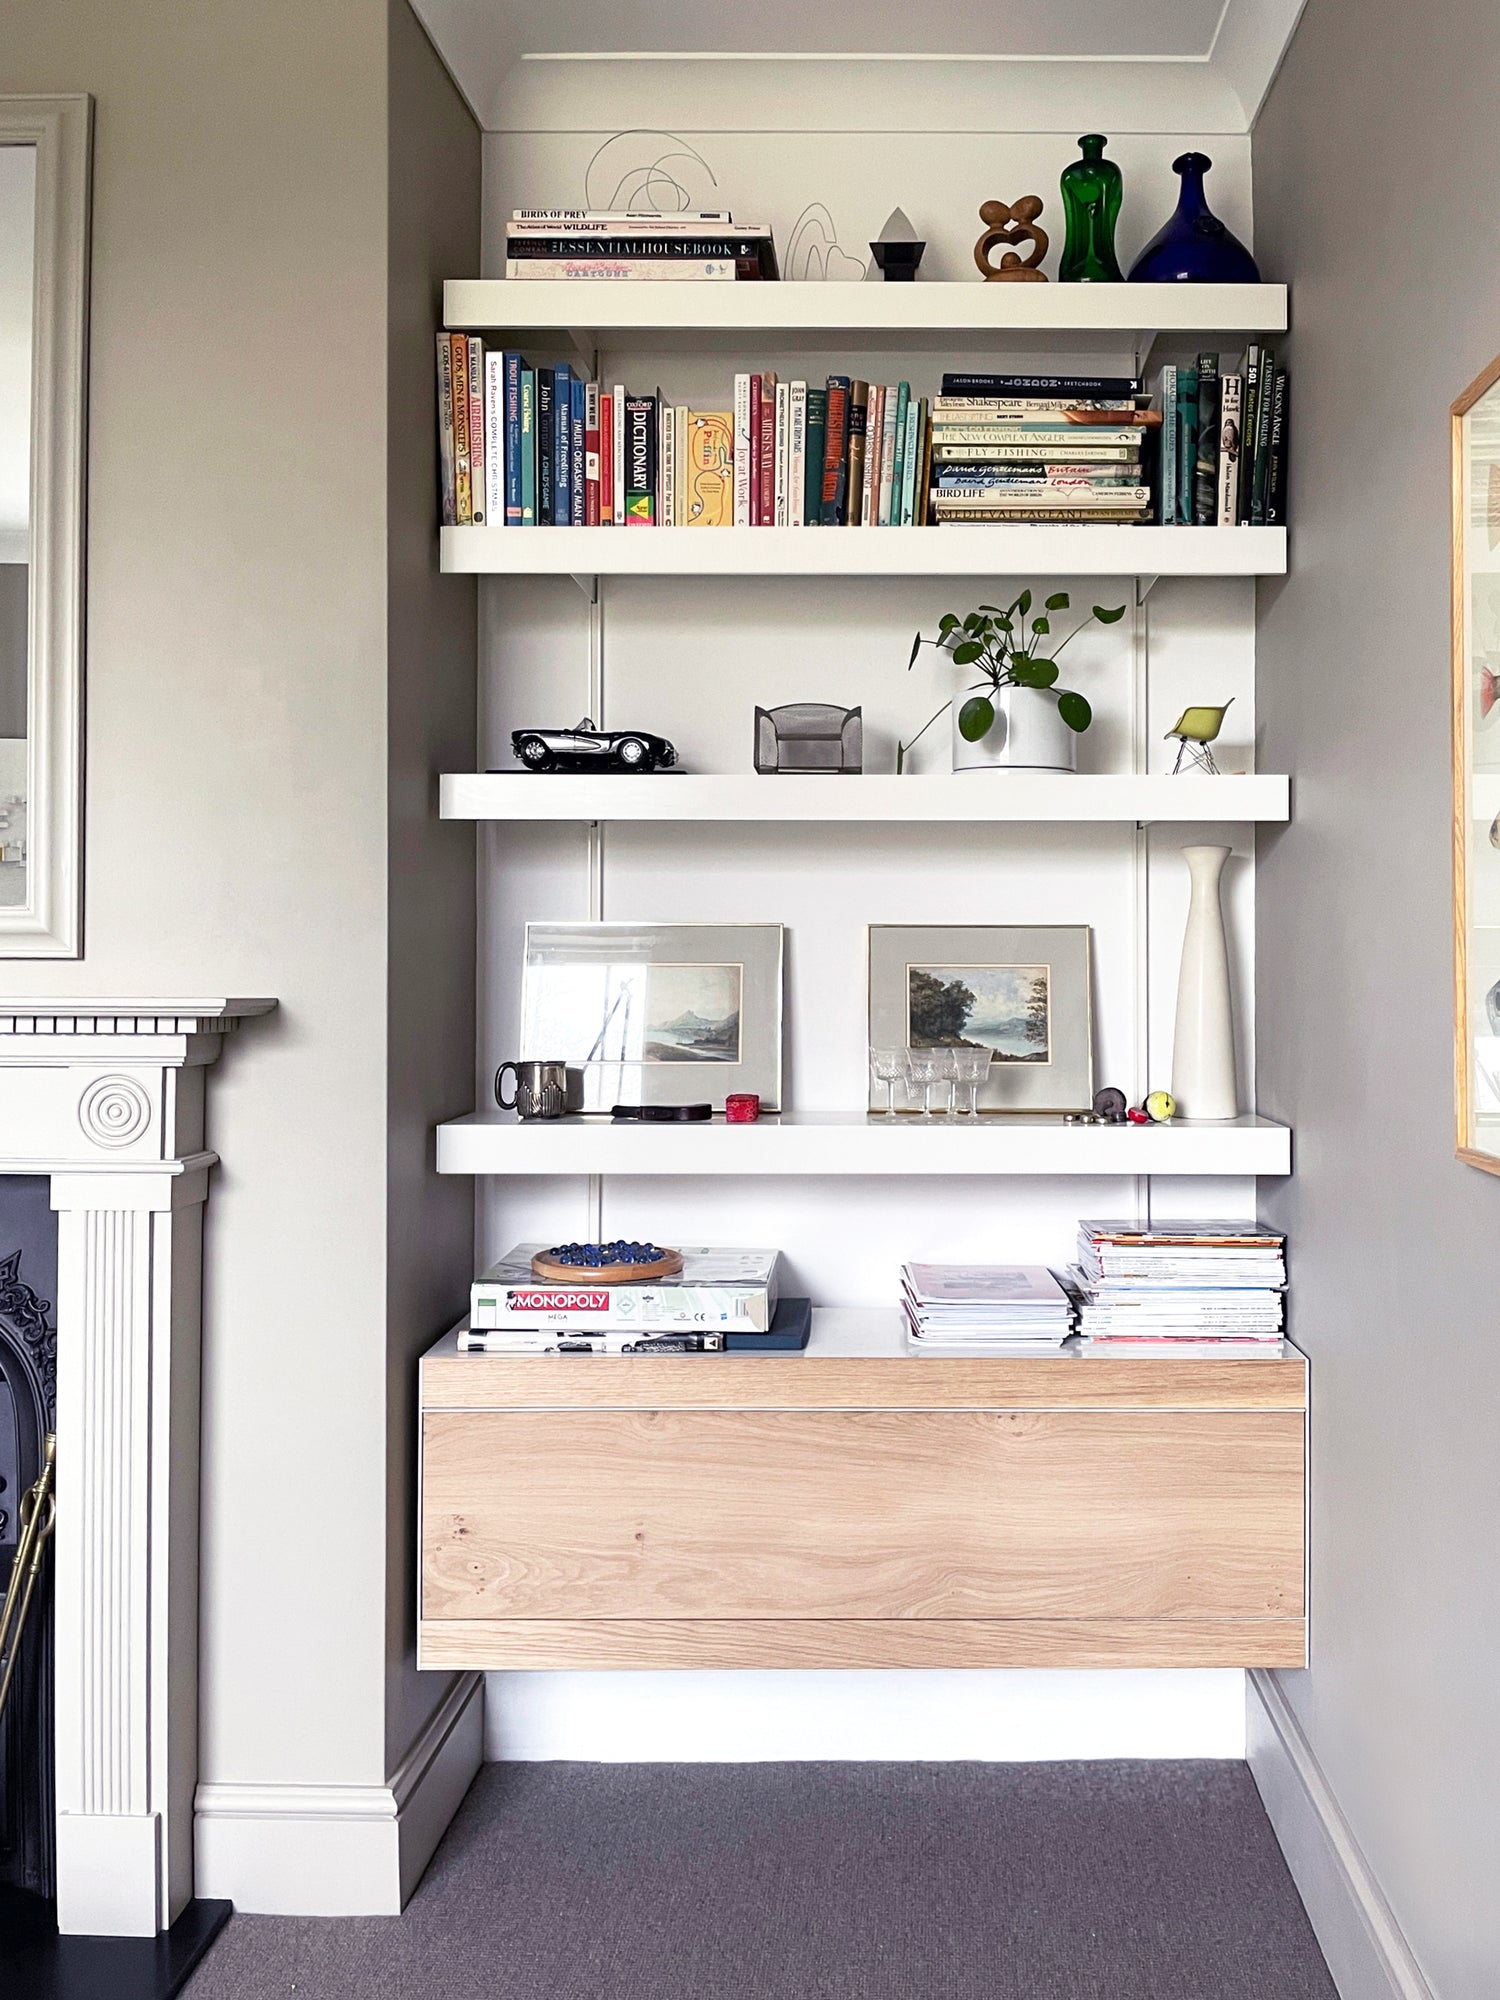 Modern alcove shelving with oak cabinet and white shelves above